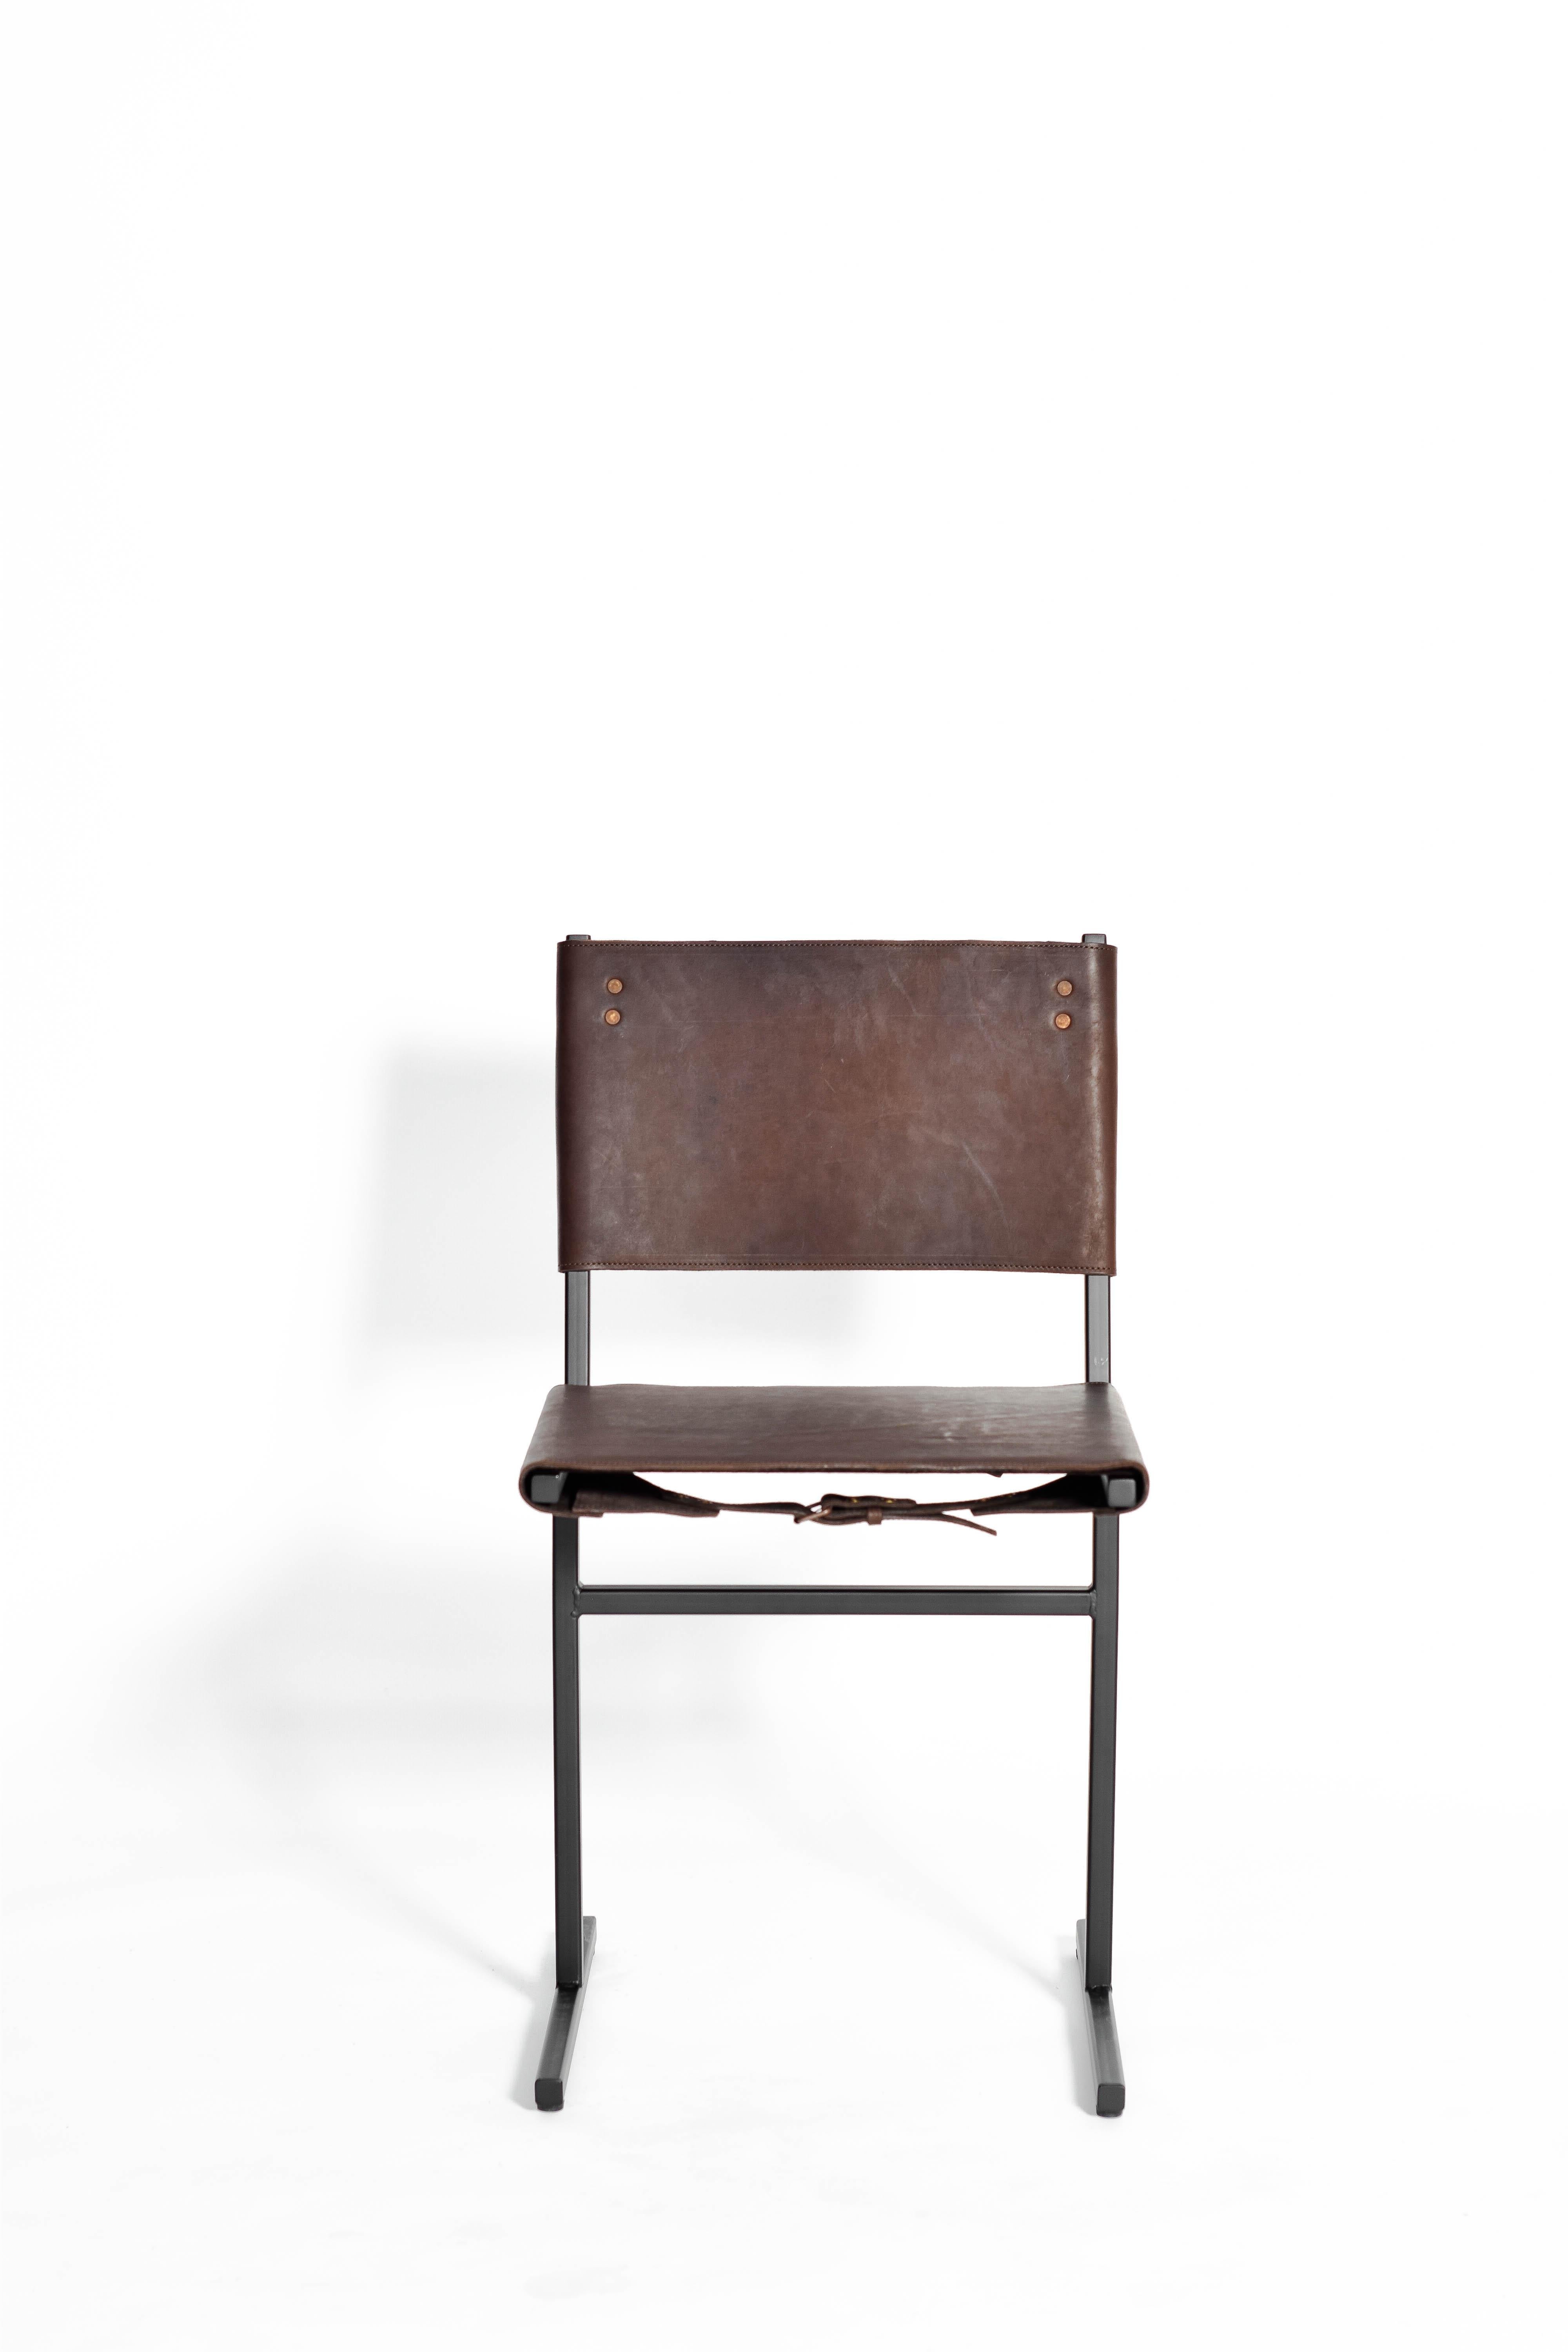 Chocolate and black Memento chair, Jesse Sanderson
Original signed chair by Jesse Sanderson
Materials: leather, steel
Dimensions: W 43 x D 50 x H 80 cm 
 Seating height: 47 cm.

 

Five lines and a circle – the human body can be as simple as